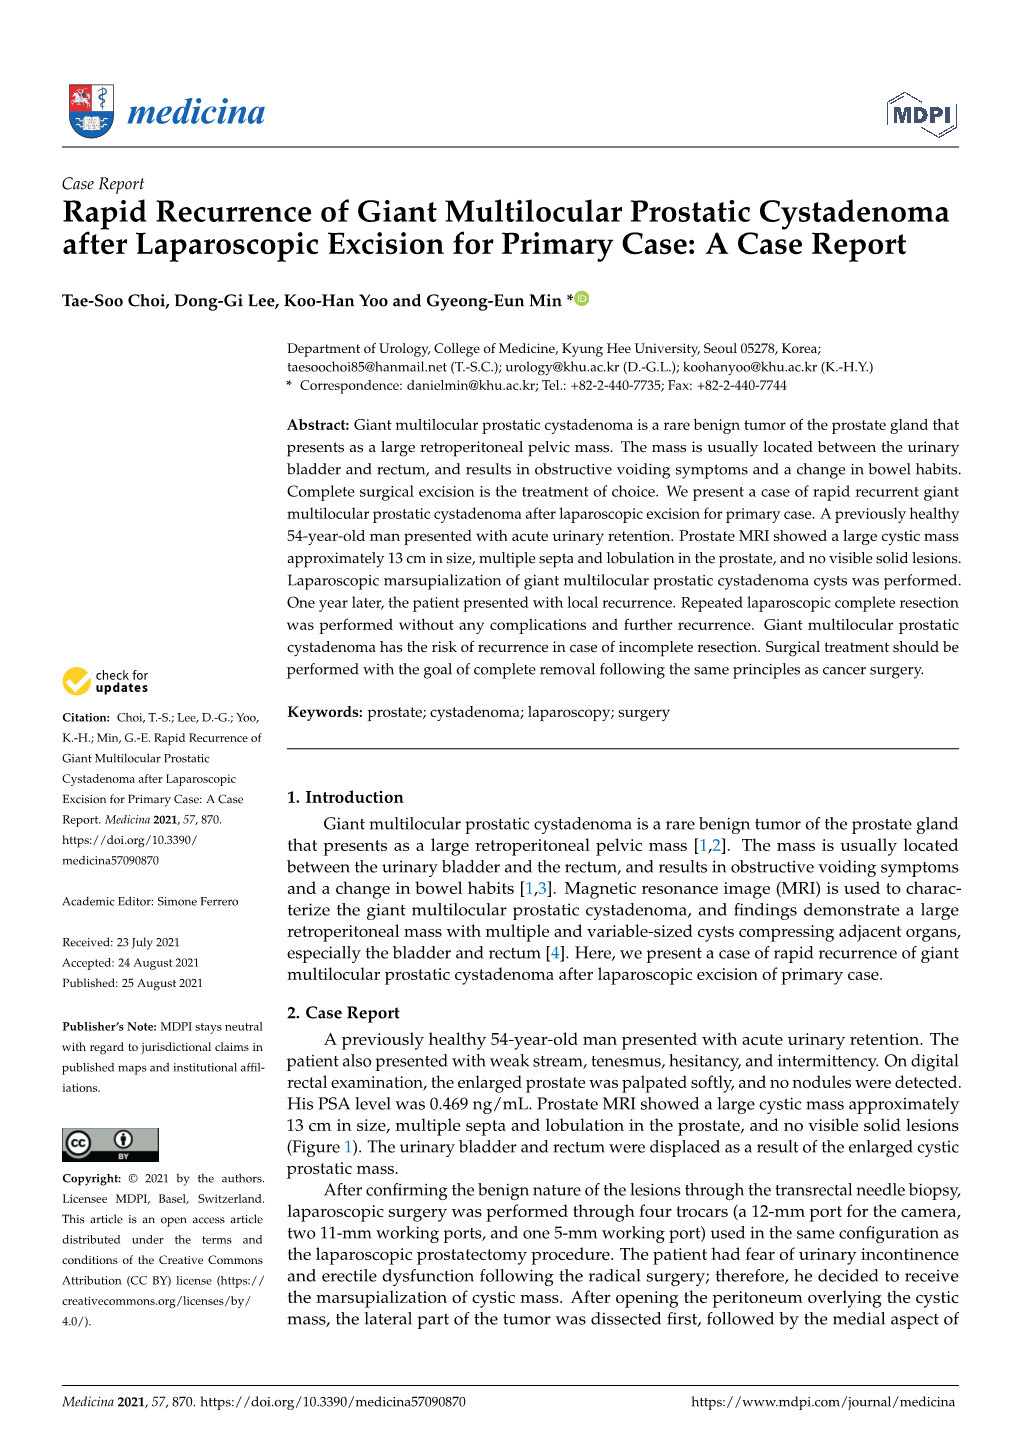 Rapid Recurrence of Giant Multilocular Prostatic Cystadenoma After Laparoscopic Excision for Primary Case: a Case Report